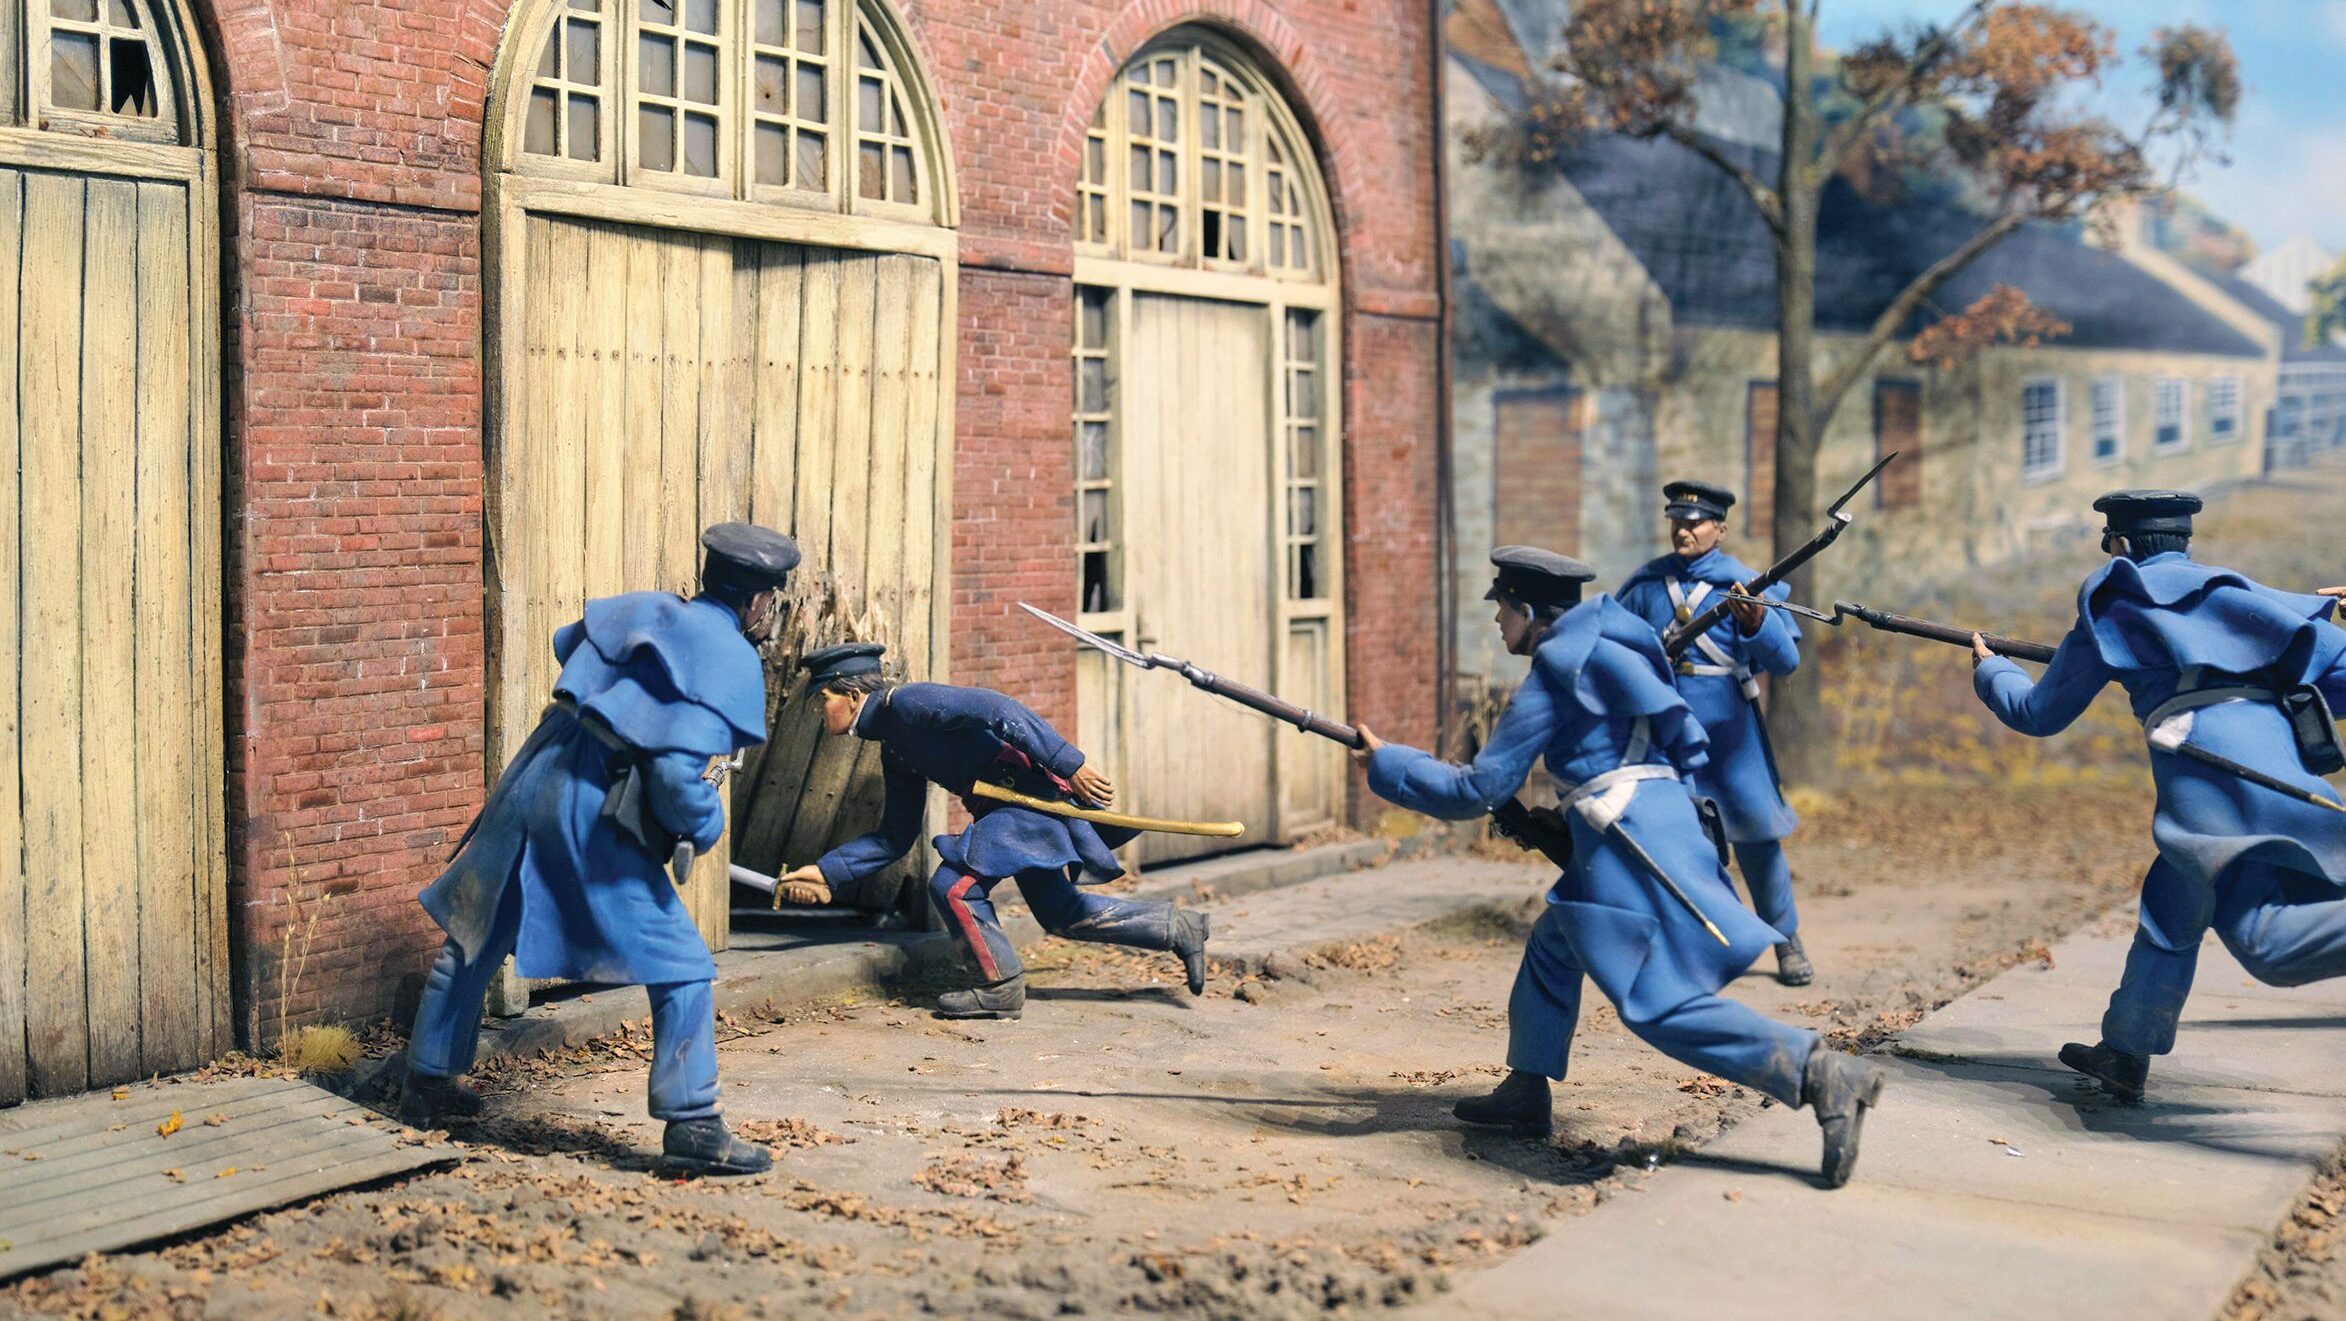 First Lieutenant Israel Greene leads his Marines into the engine house, as depicted in this diorama at the National Museum of the Marine Corps Heritage Center in Virginia.